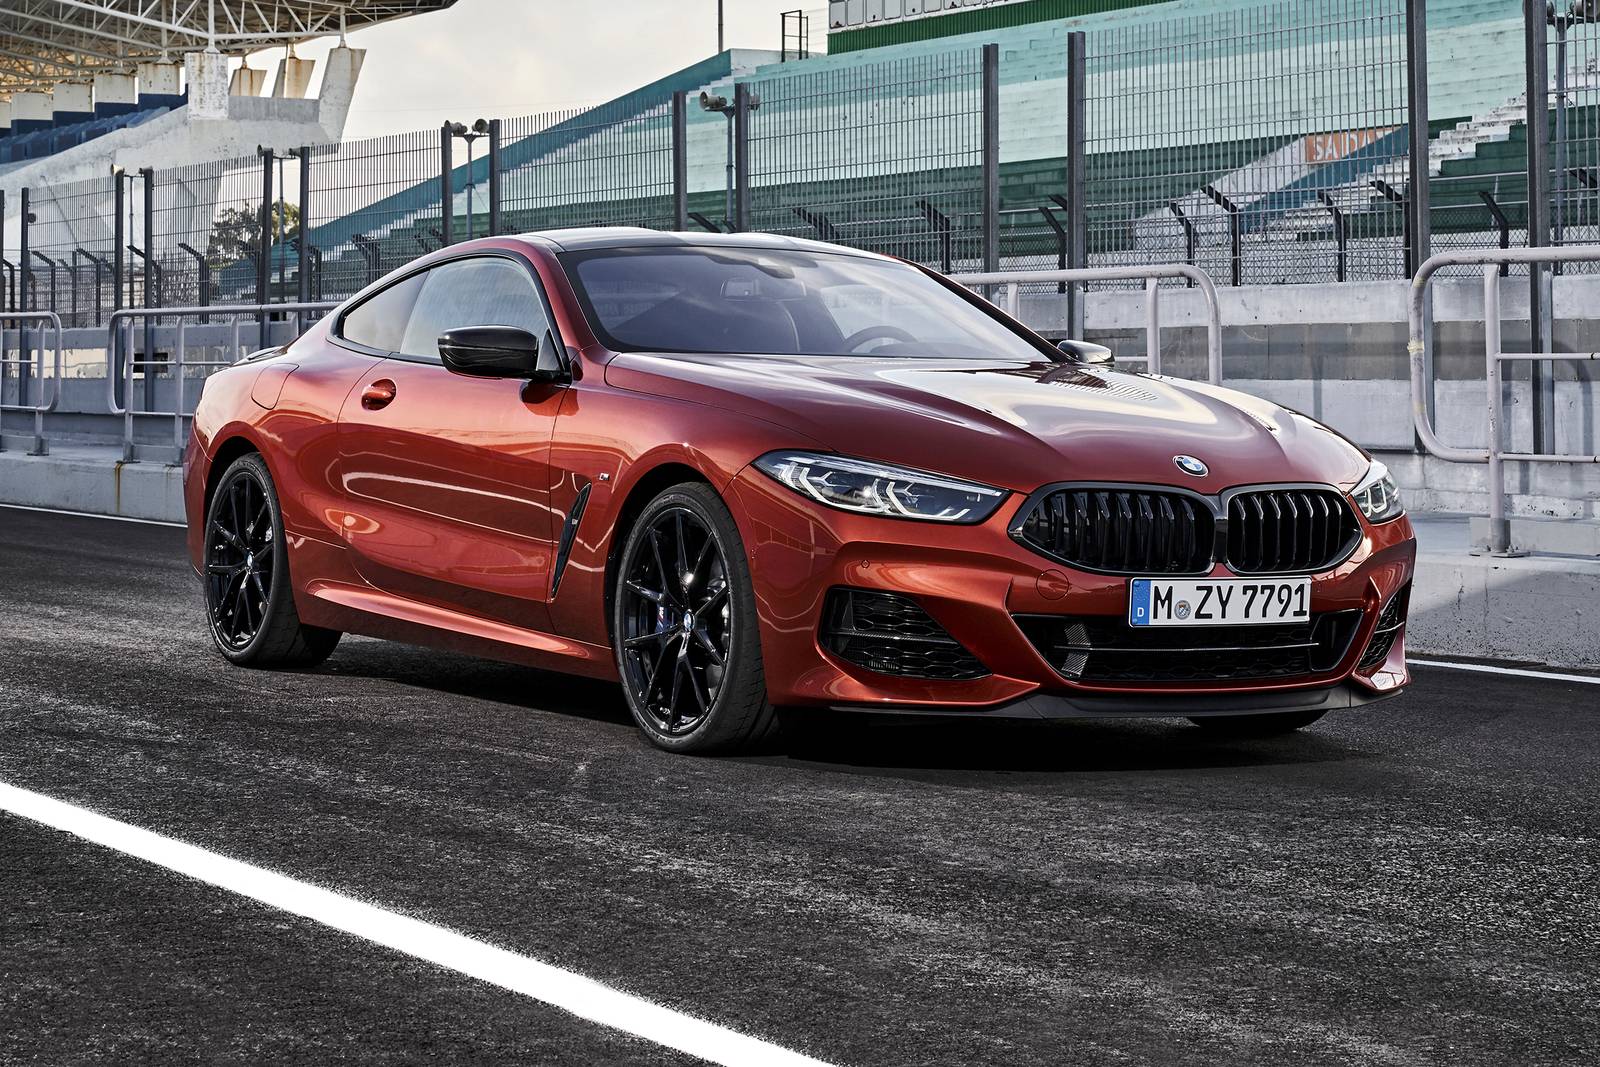 Used 2019 BMW 8 Series Coupe Review | Edmunds